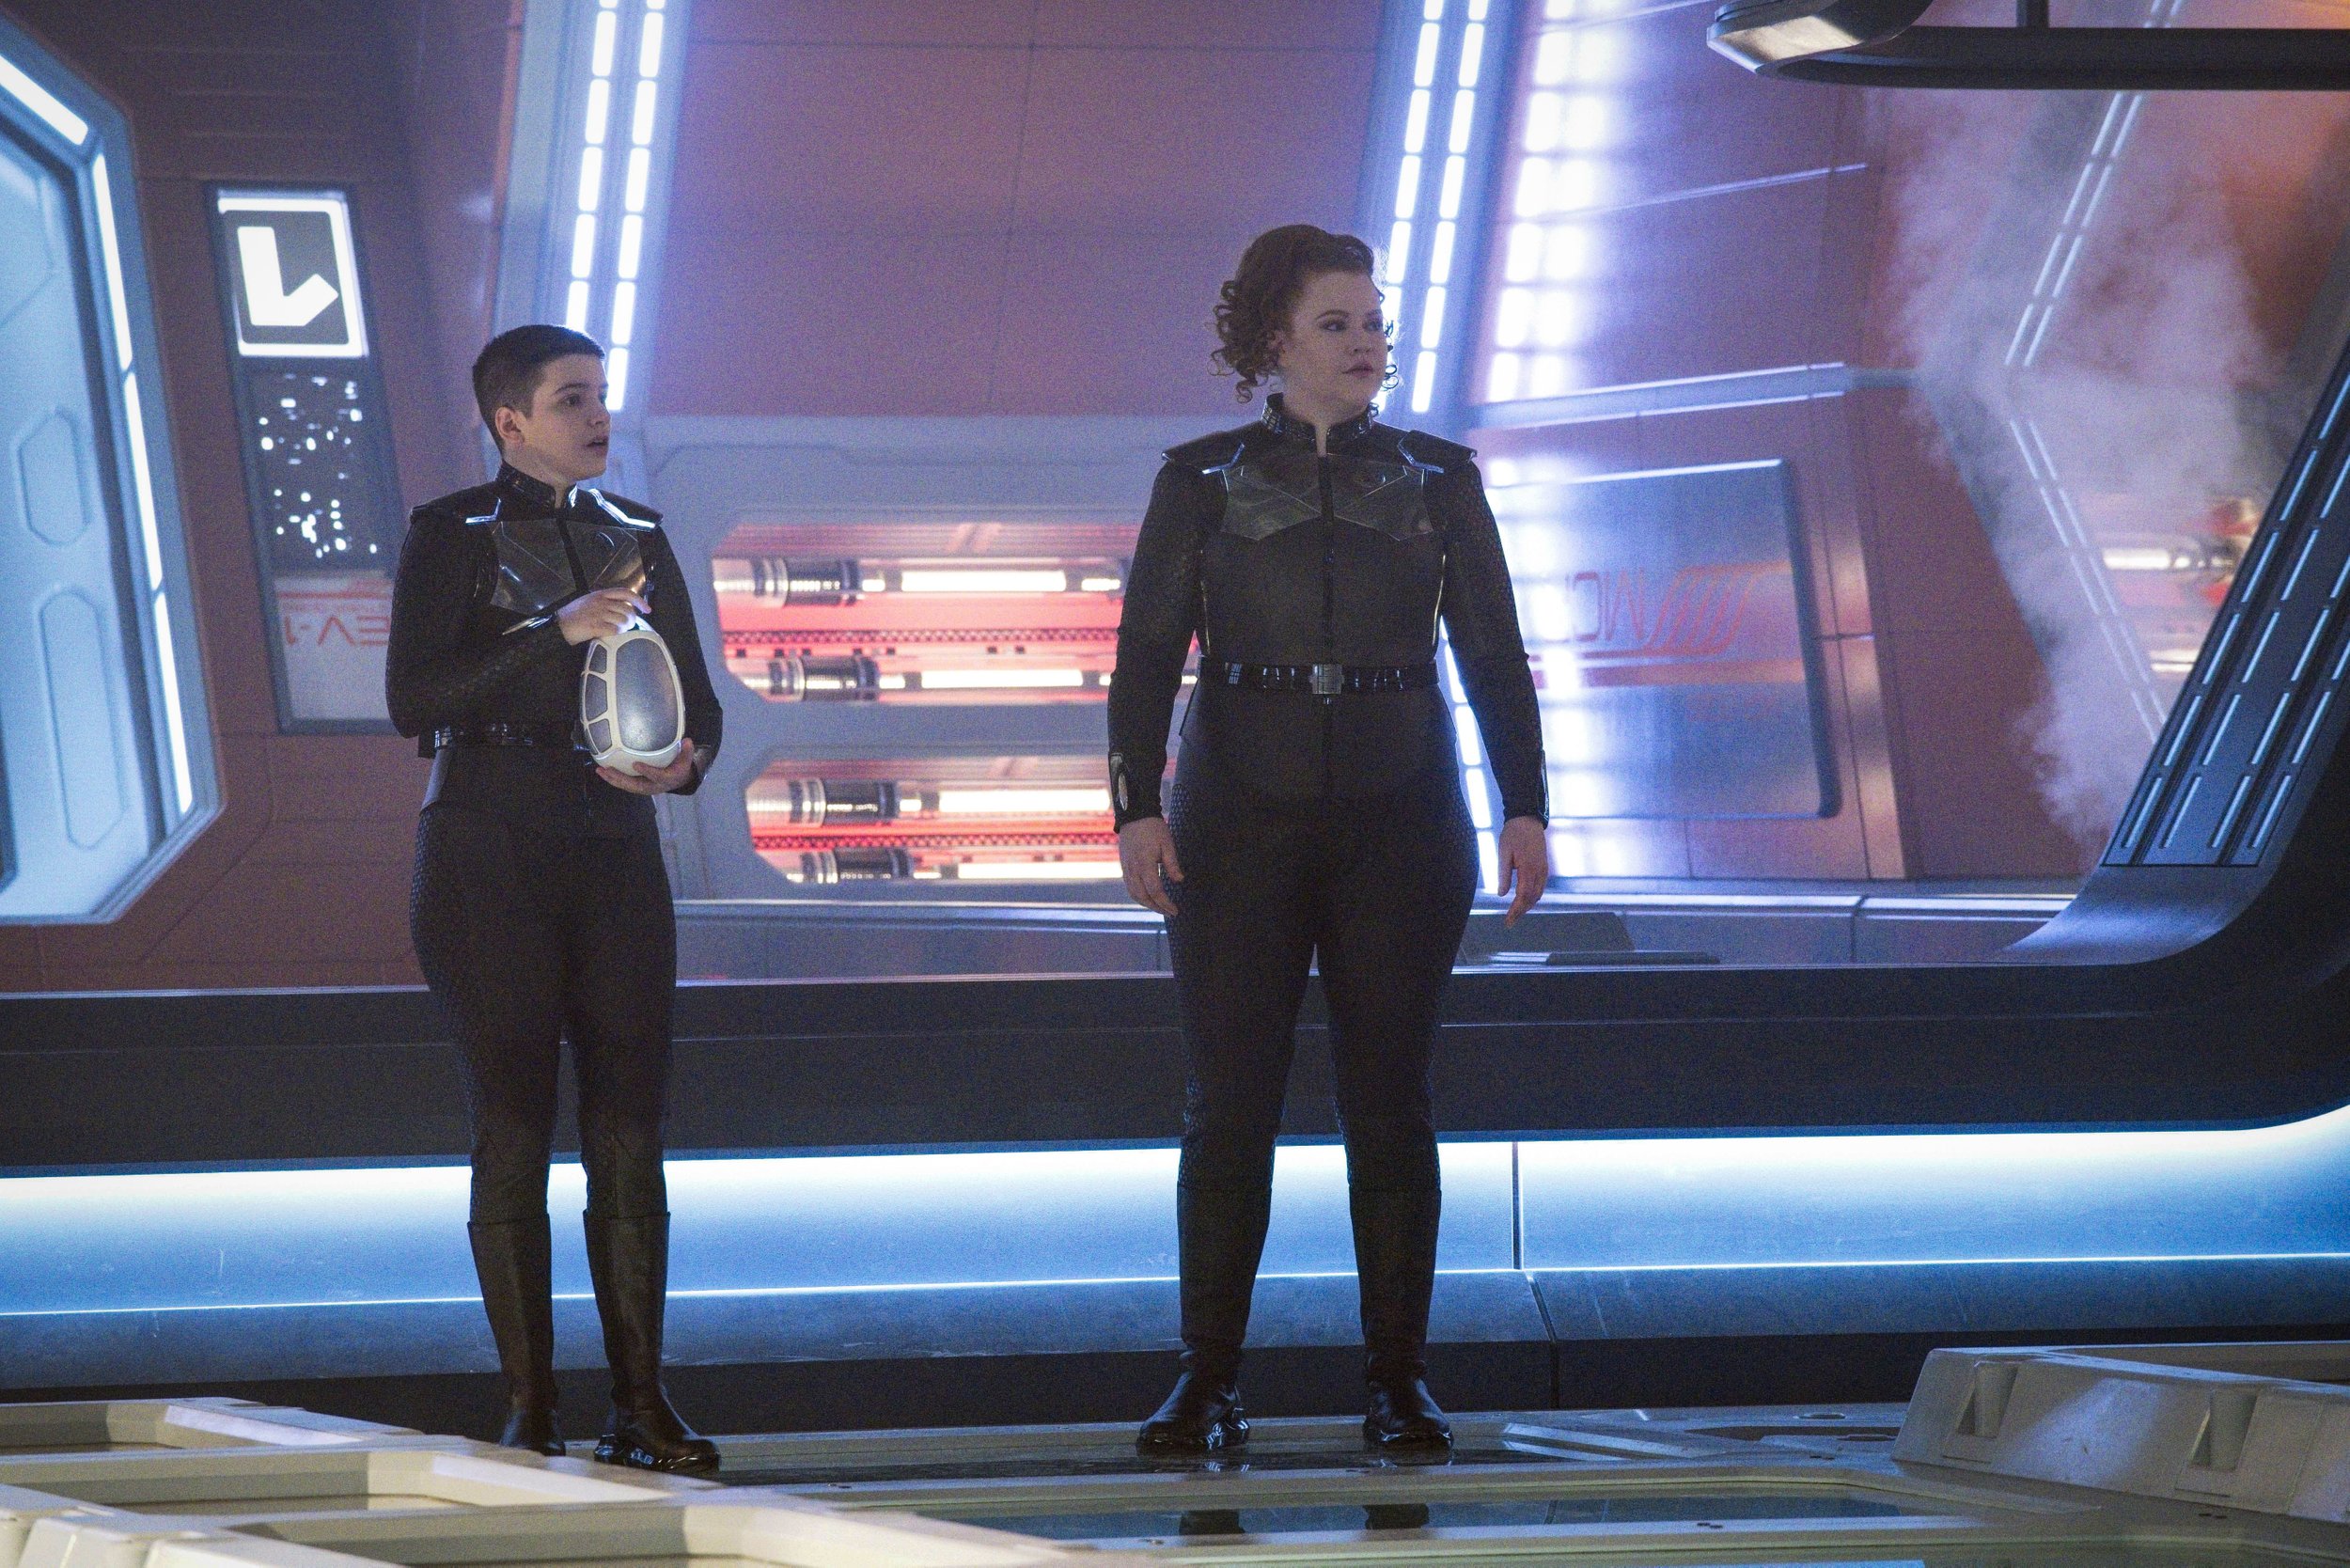   Pictured: Blu del Barrio as Adira and Mary Wiseman as Tilly of the Paramount+ original series STAR TREK: DISCOVERY. Photo Cr: Michael Gibson/ViacomCBS © 2021 ViacomCBS. All Rights Reserved.  